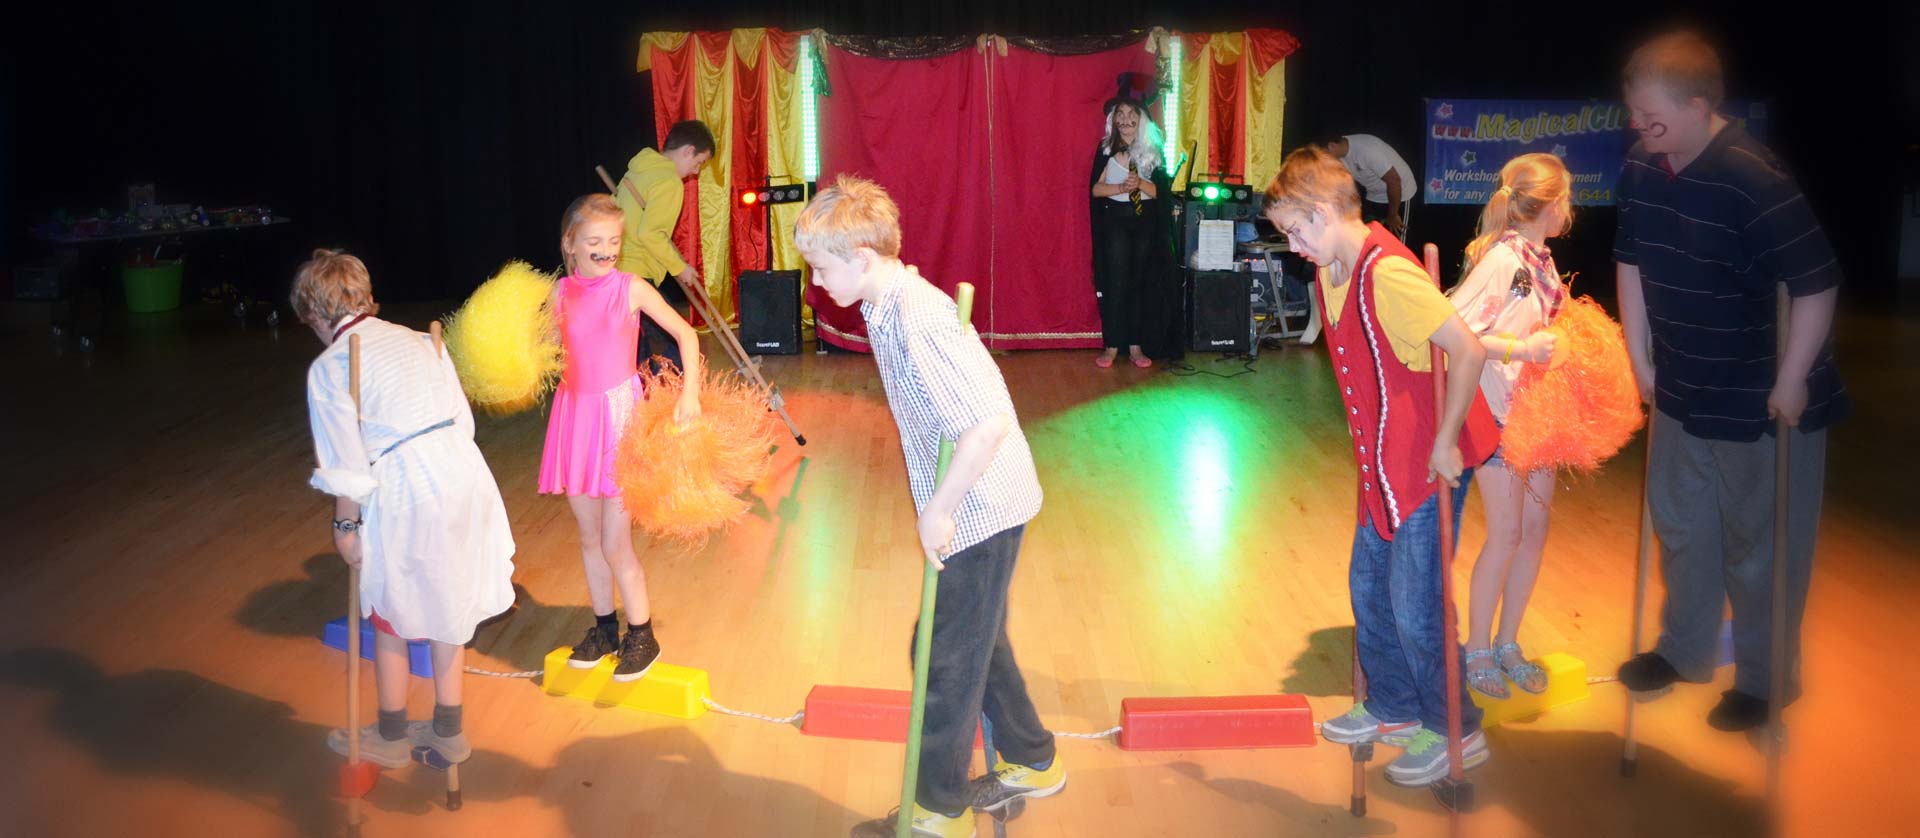 Magical Circus workshops for schools.